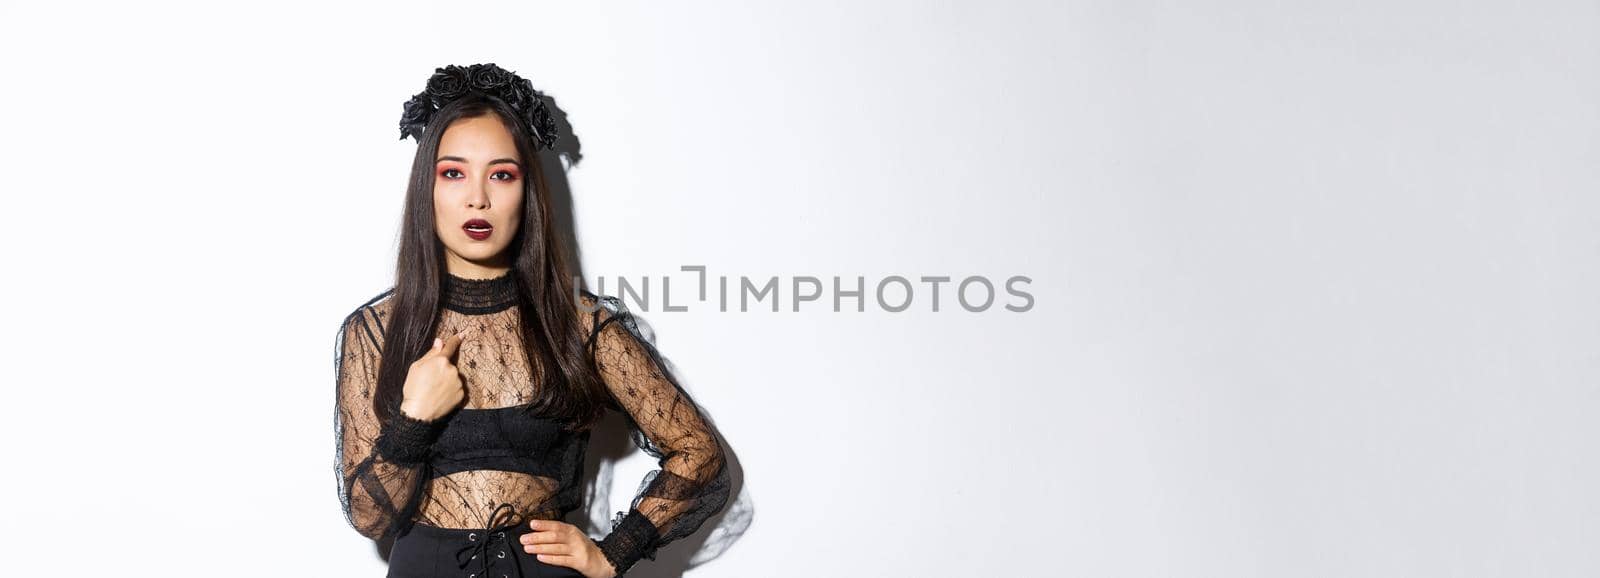 Annoyed and confused asian woman in witch halloween costume pointing at herself, looking bothered and unamused, standing reluctant over white background.